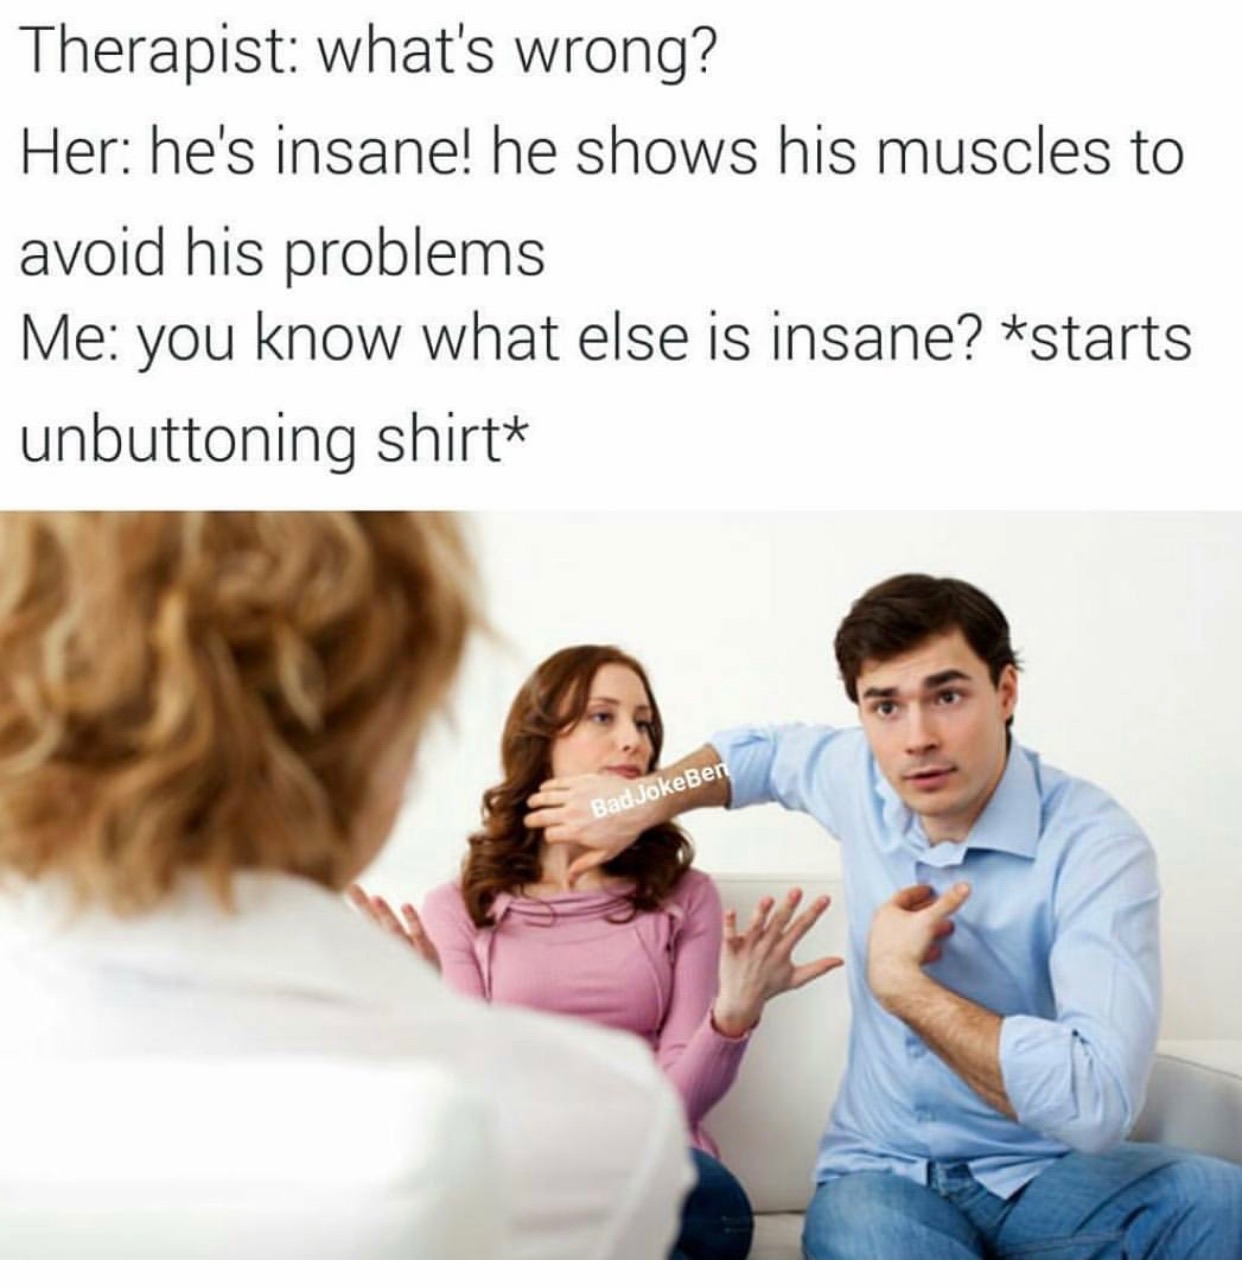 memes - he's addicted to dog memes - Therapist what's wrong? Her he's insane! he shows his muscles to avoid his problems Me you know what else is insane? starts unbuttoning shirt Bad JokeBen